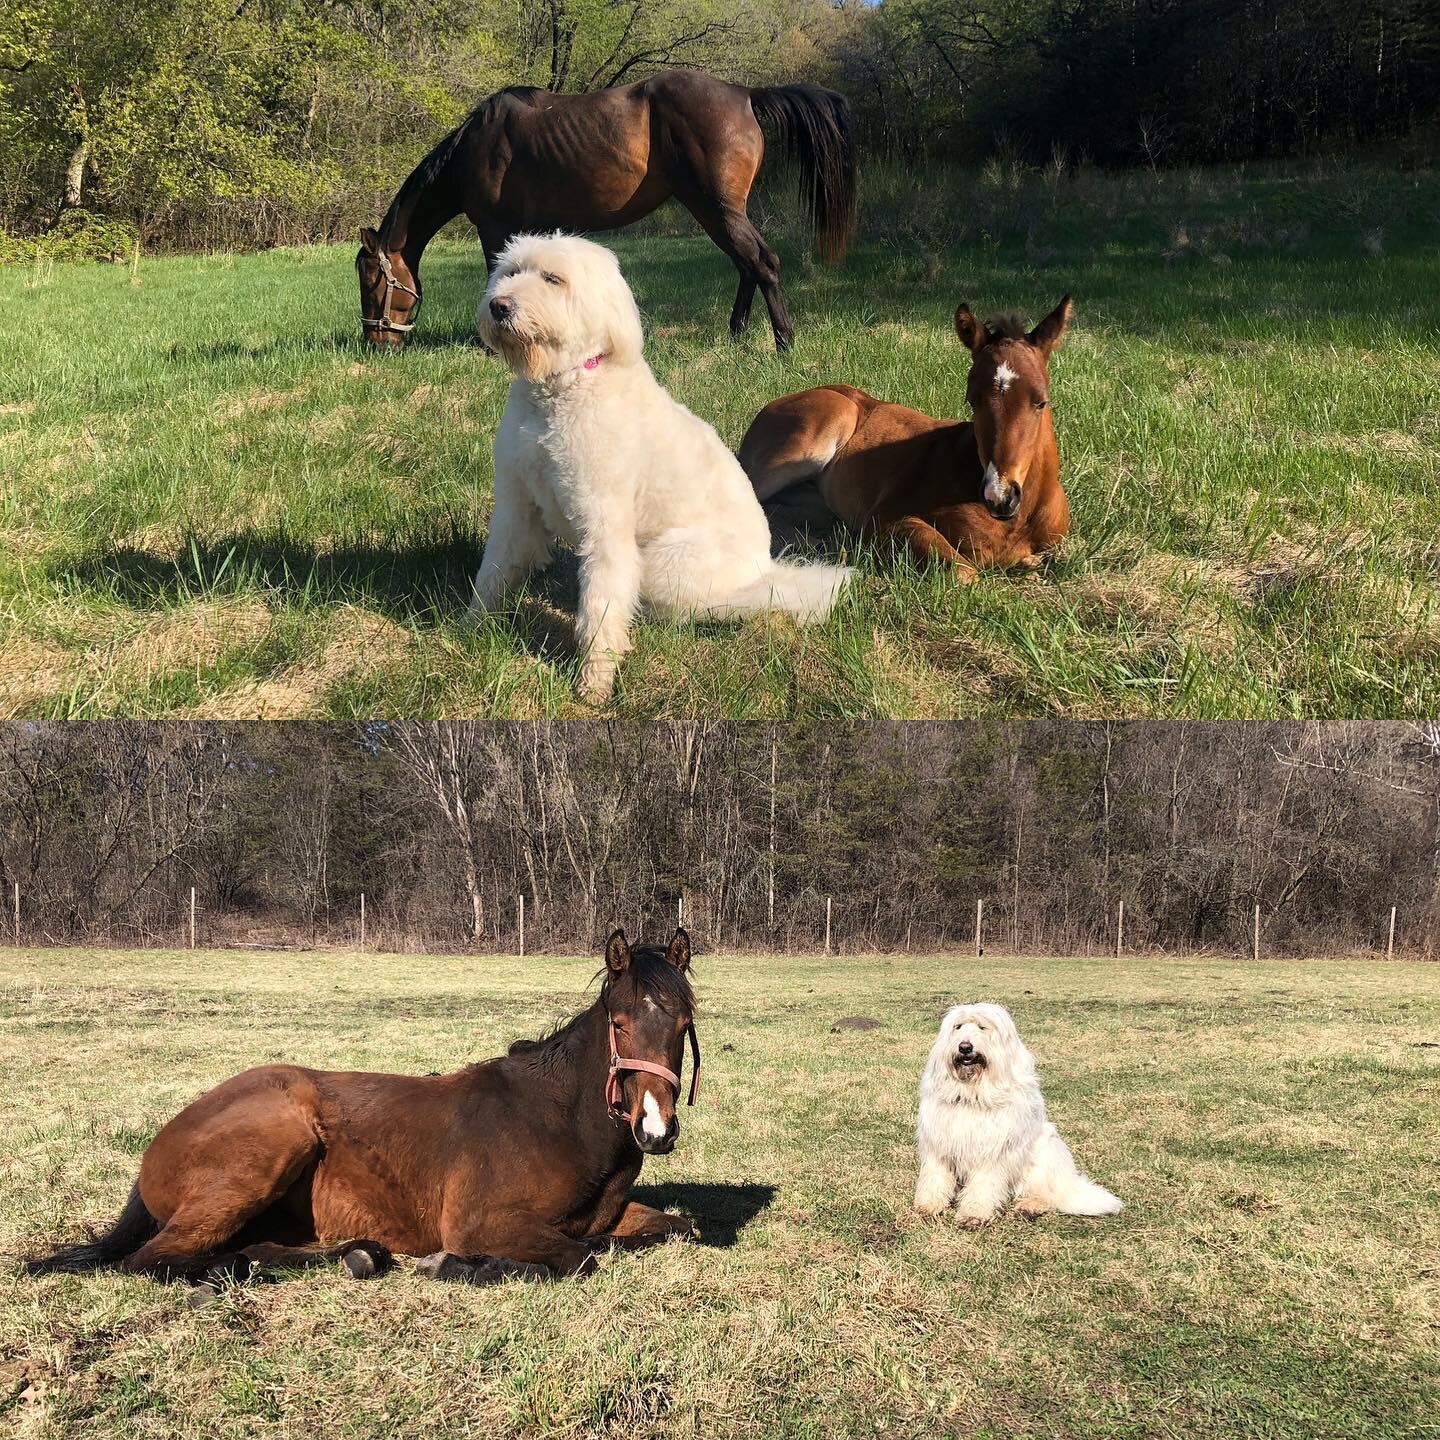 These two pics are exactly a year apart. Blanca is still babysitting but the baby is much bigger! And Blanca needs a haircut. So do I.
#thelmtreefarm